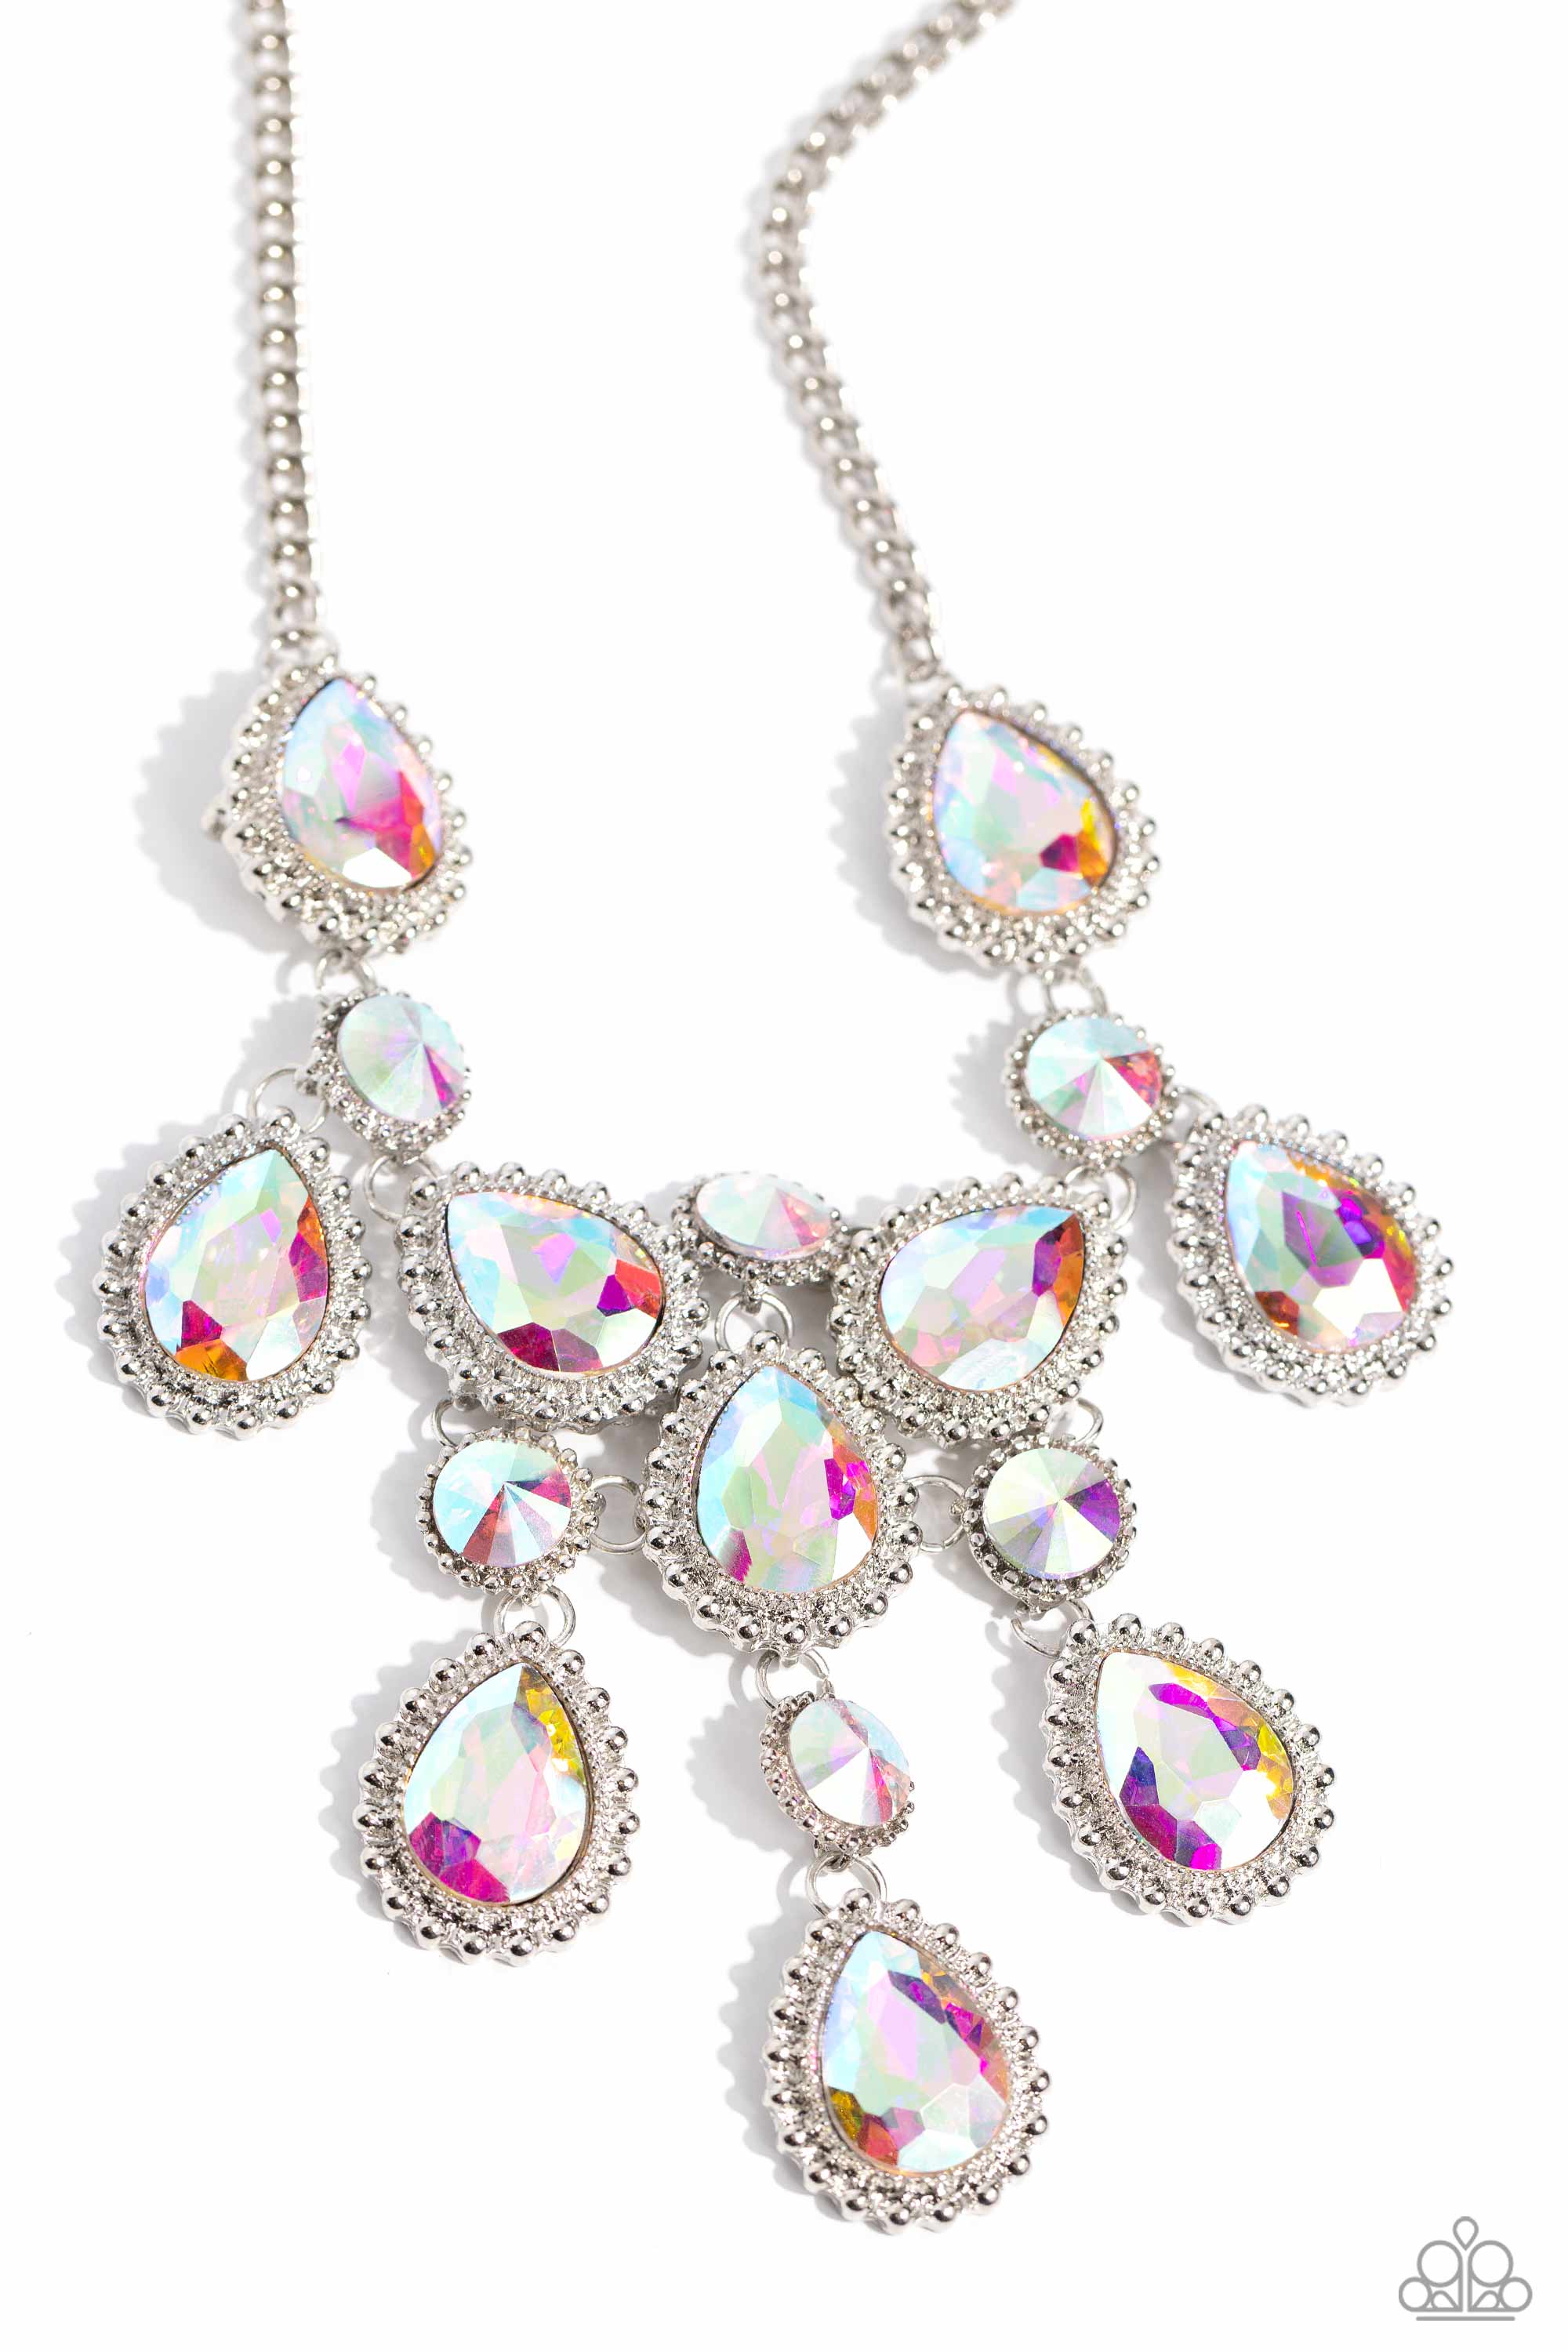 Dripping in Dazzle Multi Iridescent Rhinestone Necklace - Paparazzi Accessories- lightbox - CarasShop.com - $5 Jewelry by Cara Jewels